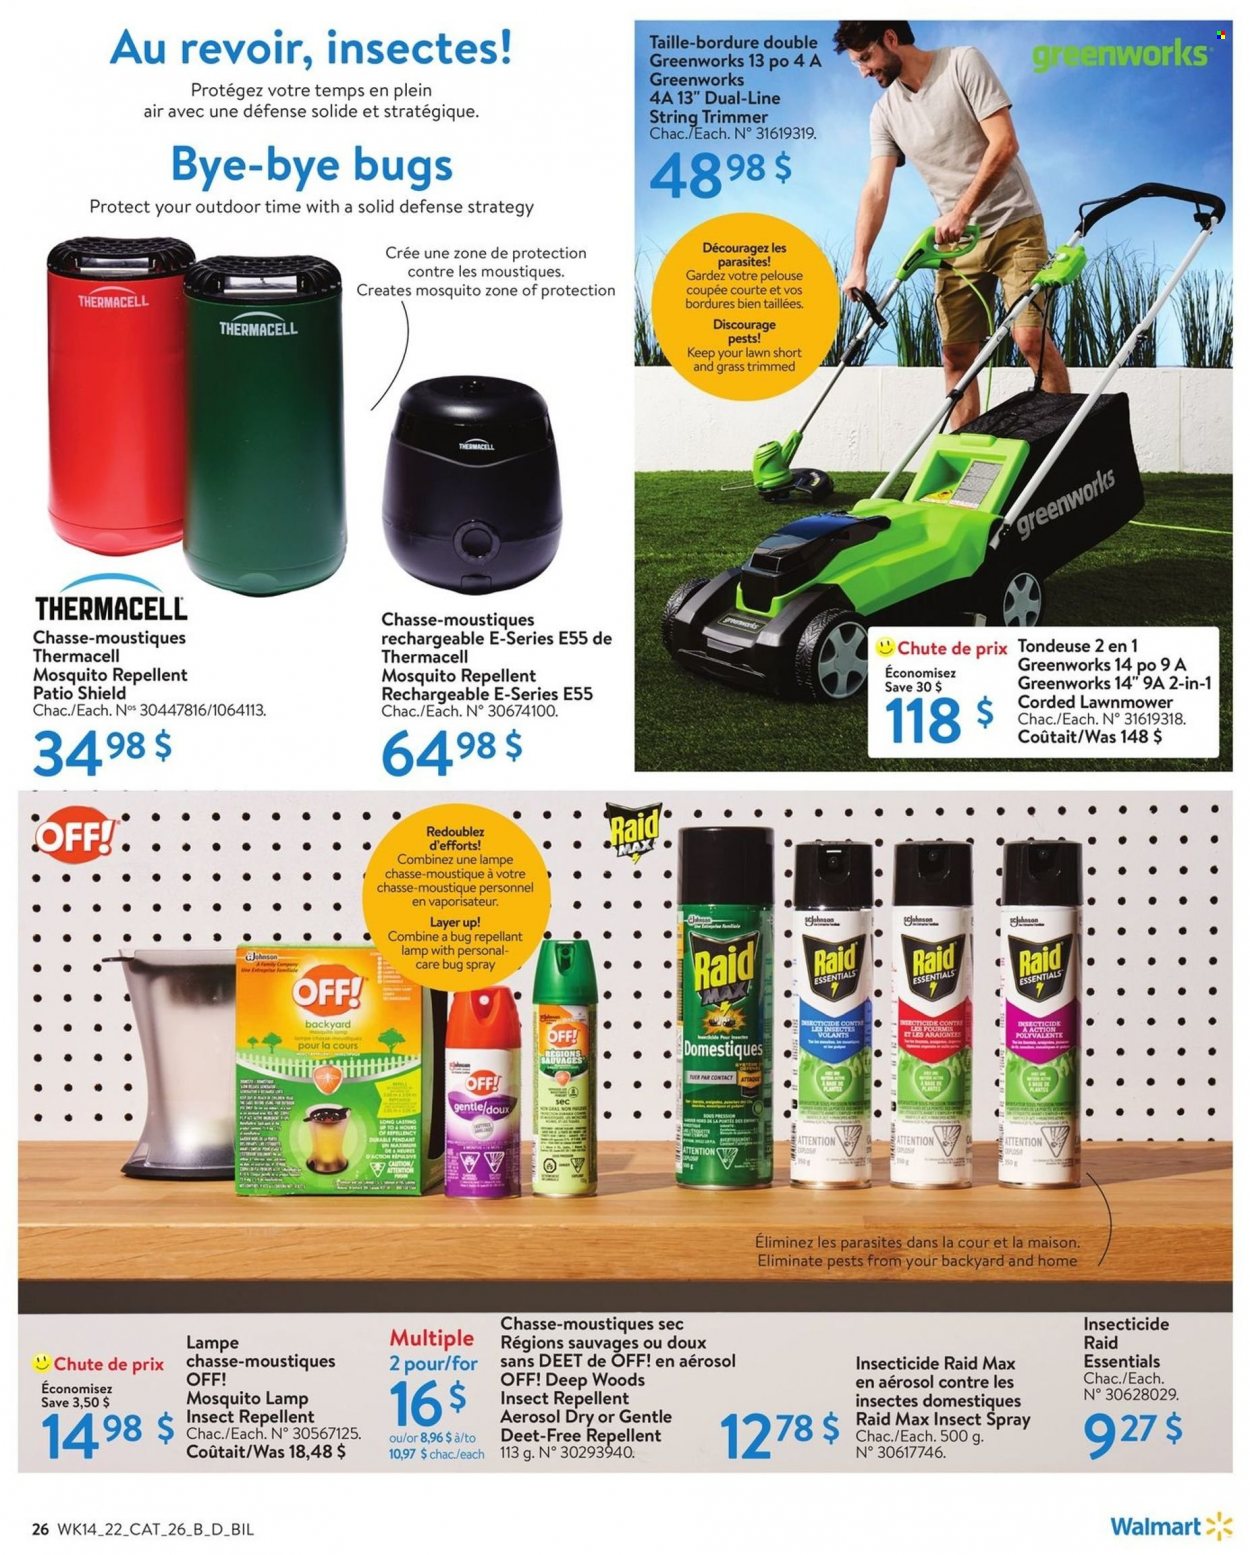 thumbnail - Walmart Flyer - April 28, 2022 - May 18, 2022 - Sales products - repellent, insecticide, Raid, trimmer, pendant, lamp, string trimmer, lawn mower. Page 29.